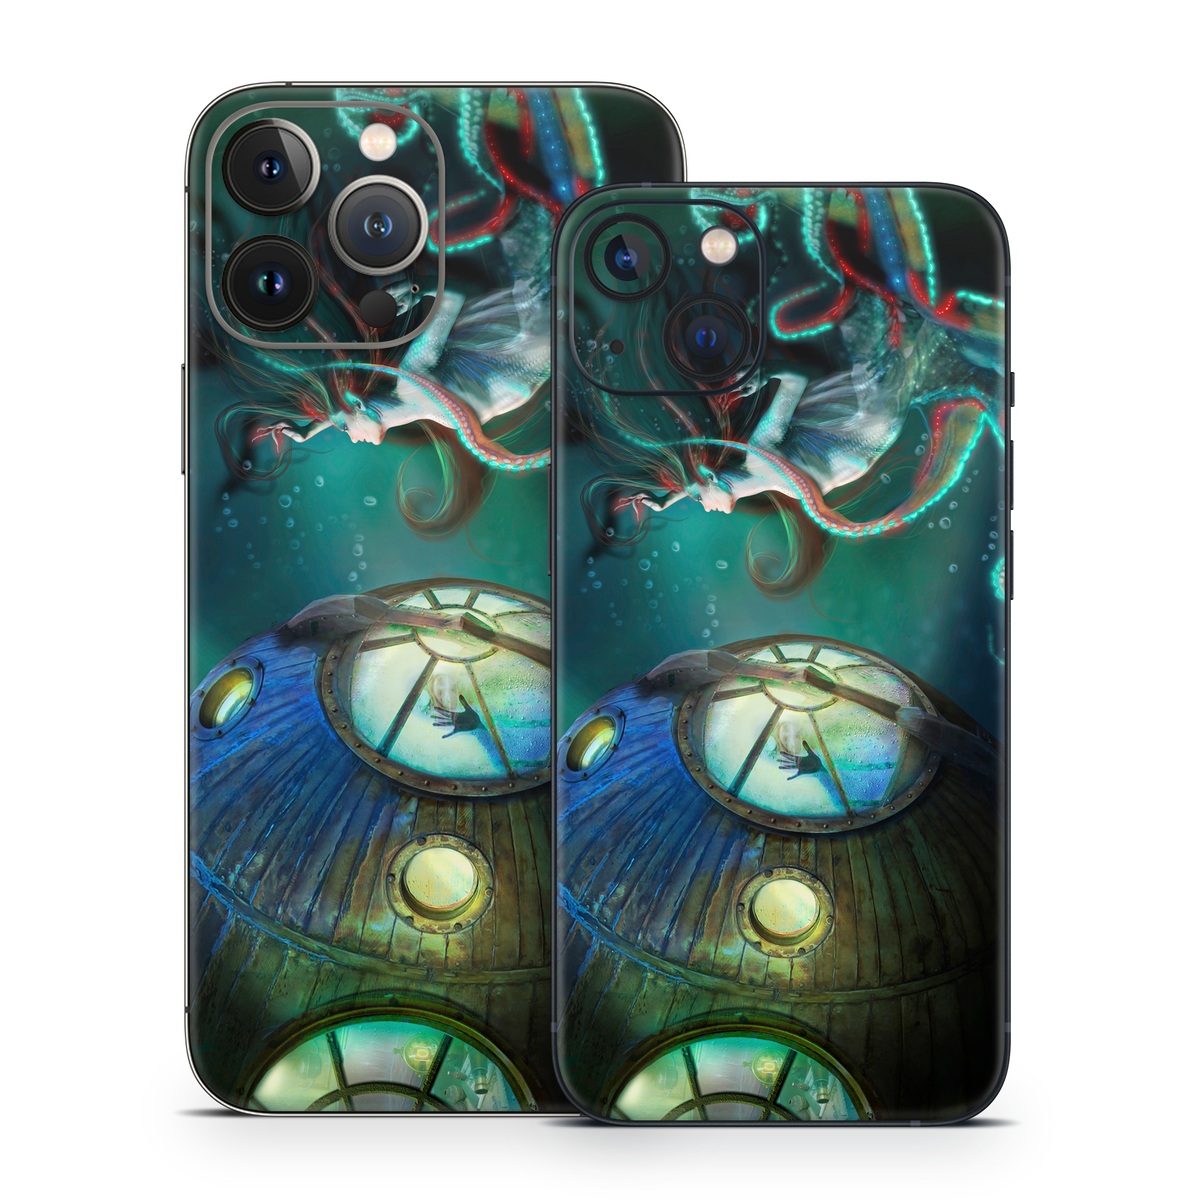 iPhone 13 Series Skin design of Cg artwork, Illustration, Art, Fictional character, Fiction, Space, Fractal art, Graphic design, Mythology, Graphics, with black, gray, blue, green colors